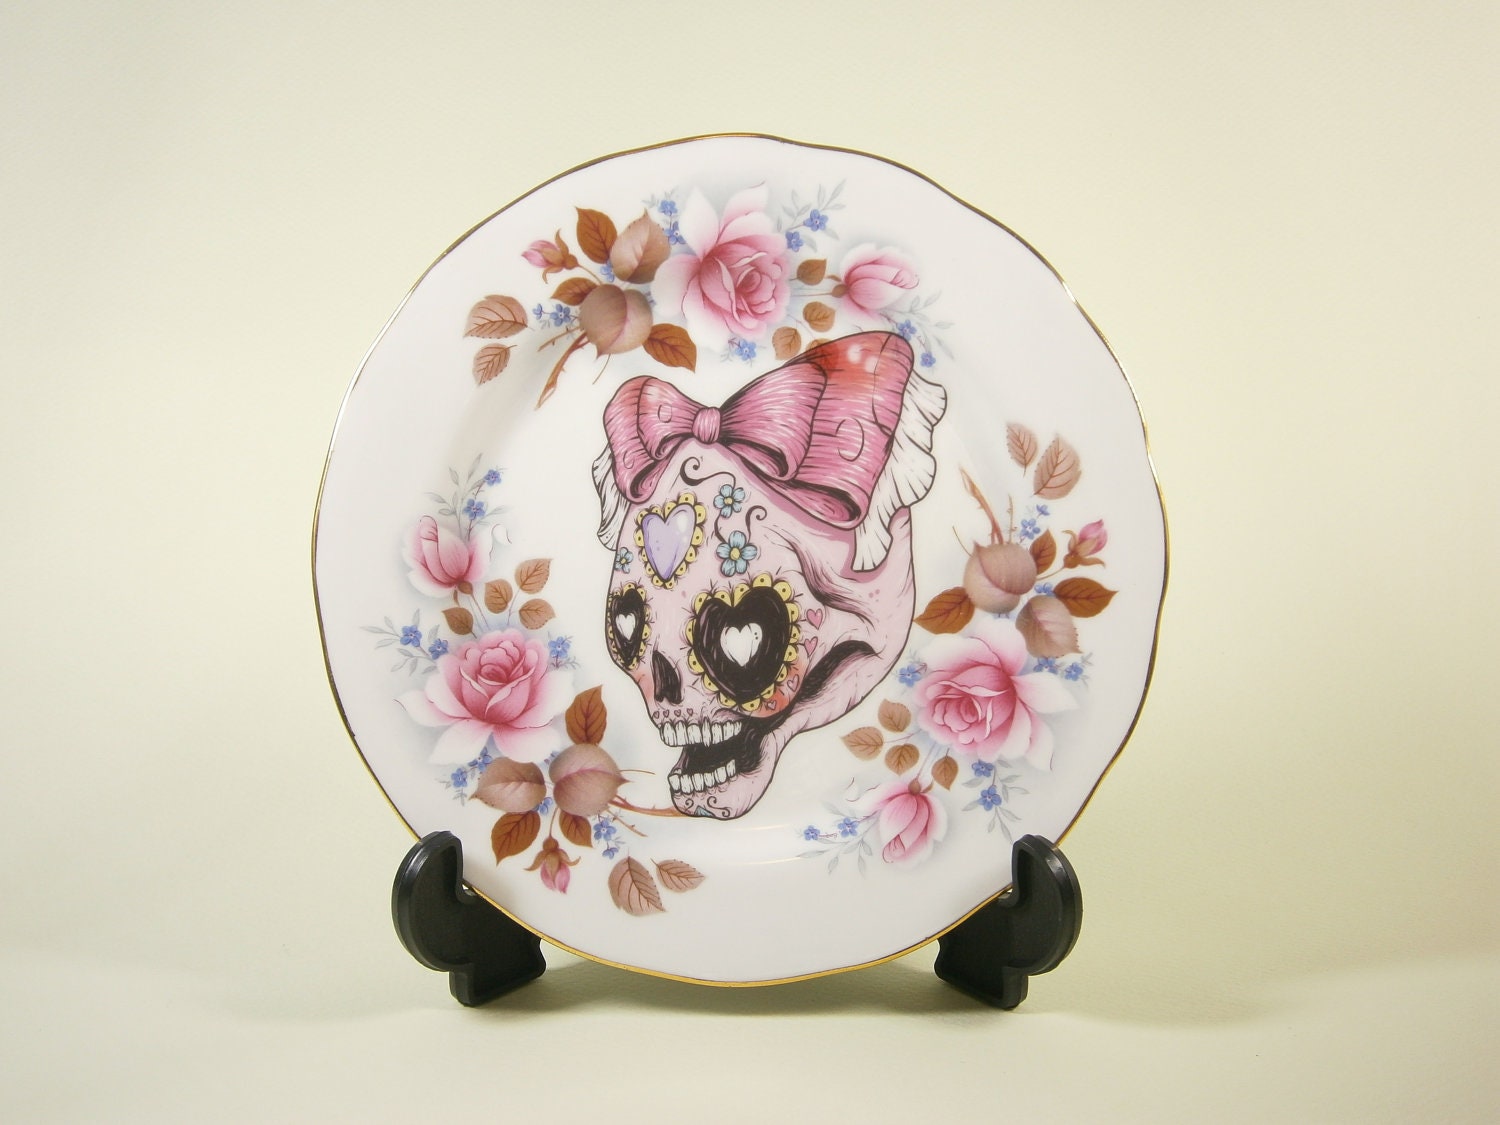 Vintage Butter Plate with a Sugar Skull Illustration by Little Lala